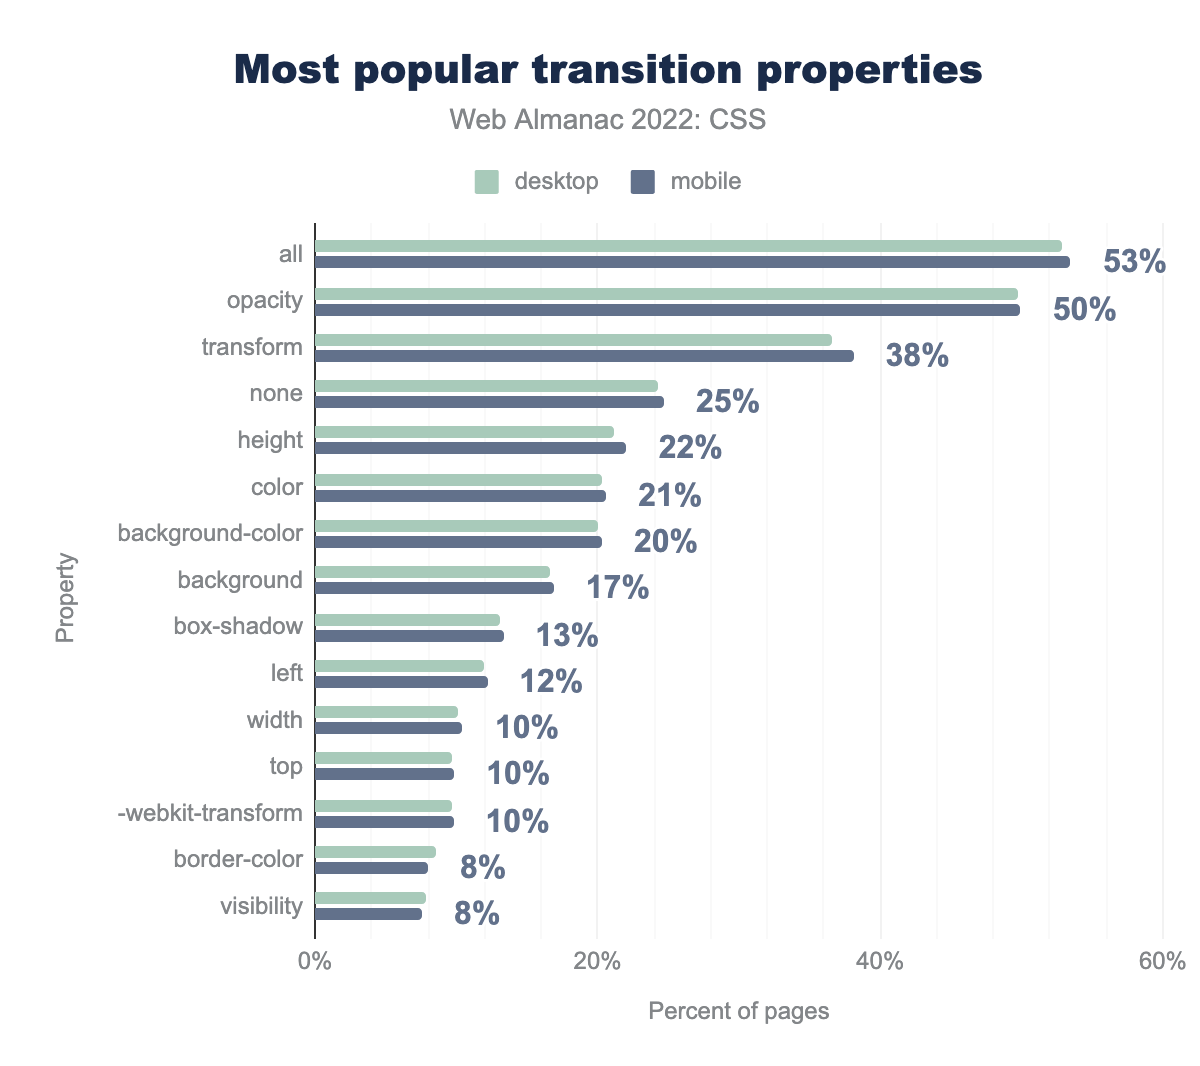 The most popular transition properties by percent of pages.